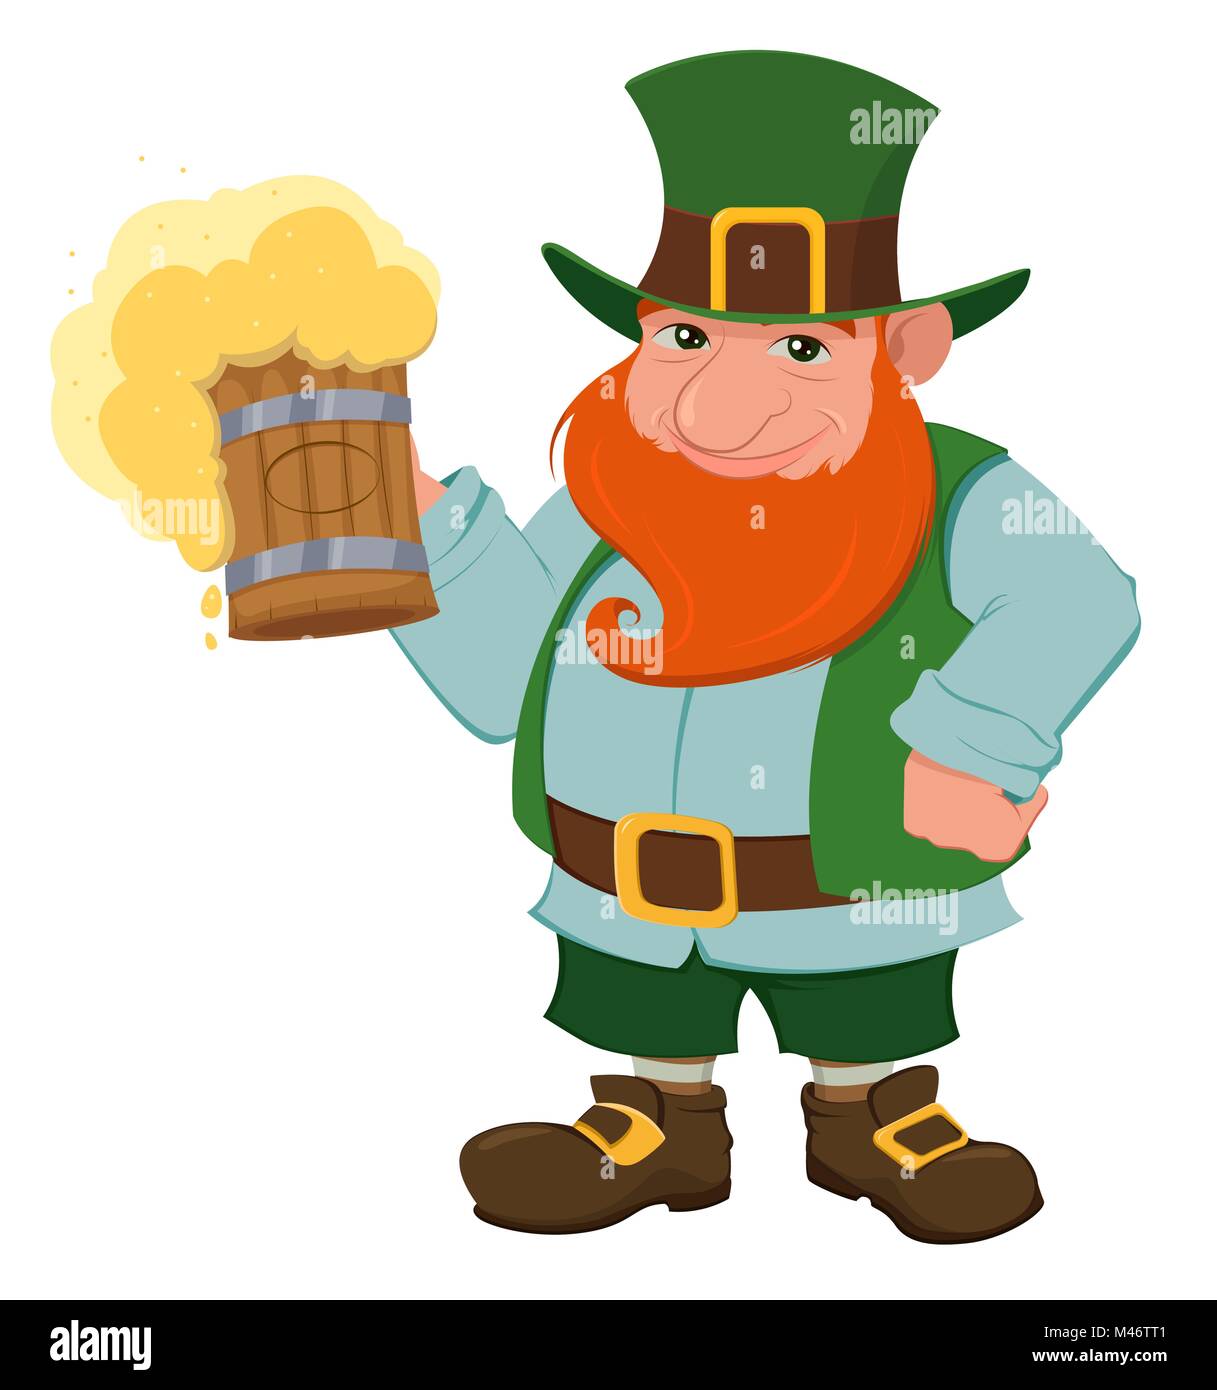 Happy Saint Patrick's Day. Character with green hat and red beard. Cartoon happy leprechaun holding a pint of fresh beer. Vector illustration Stock Vector